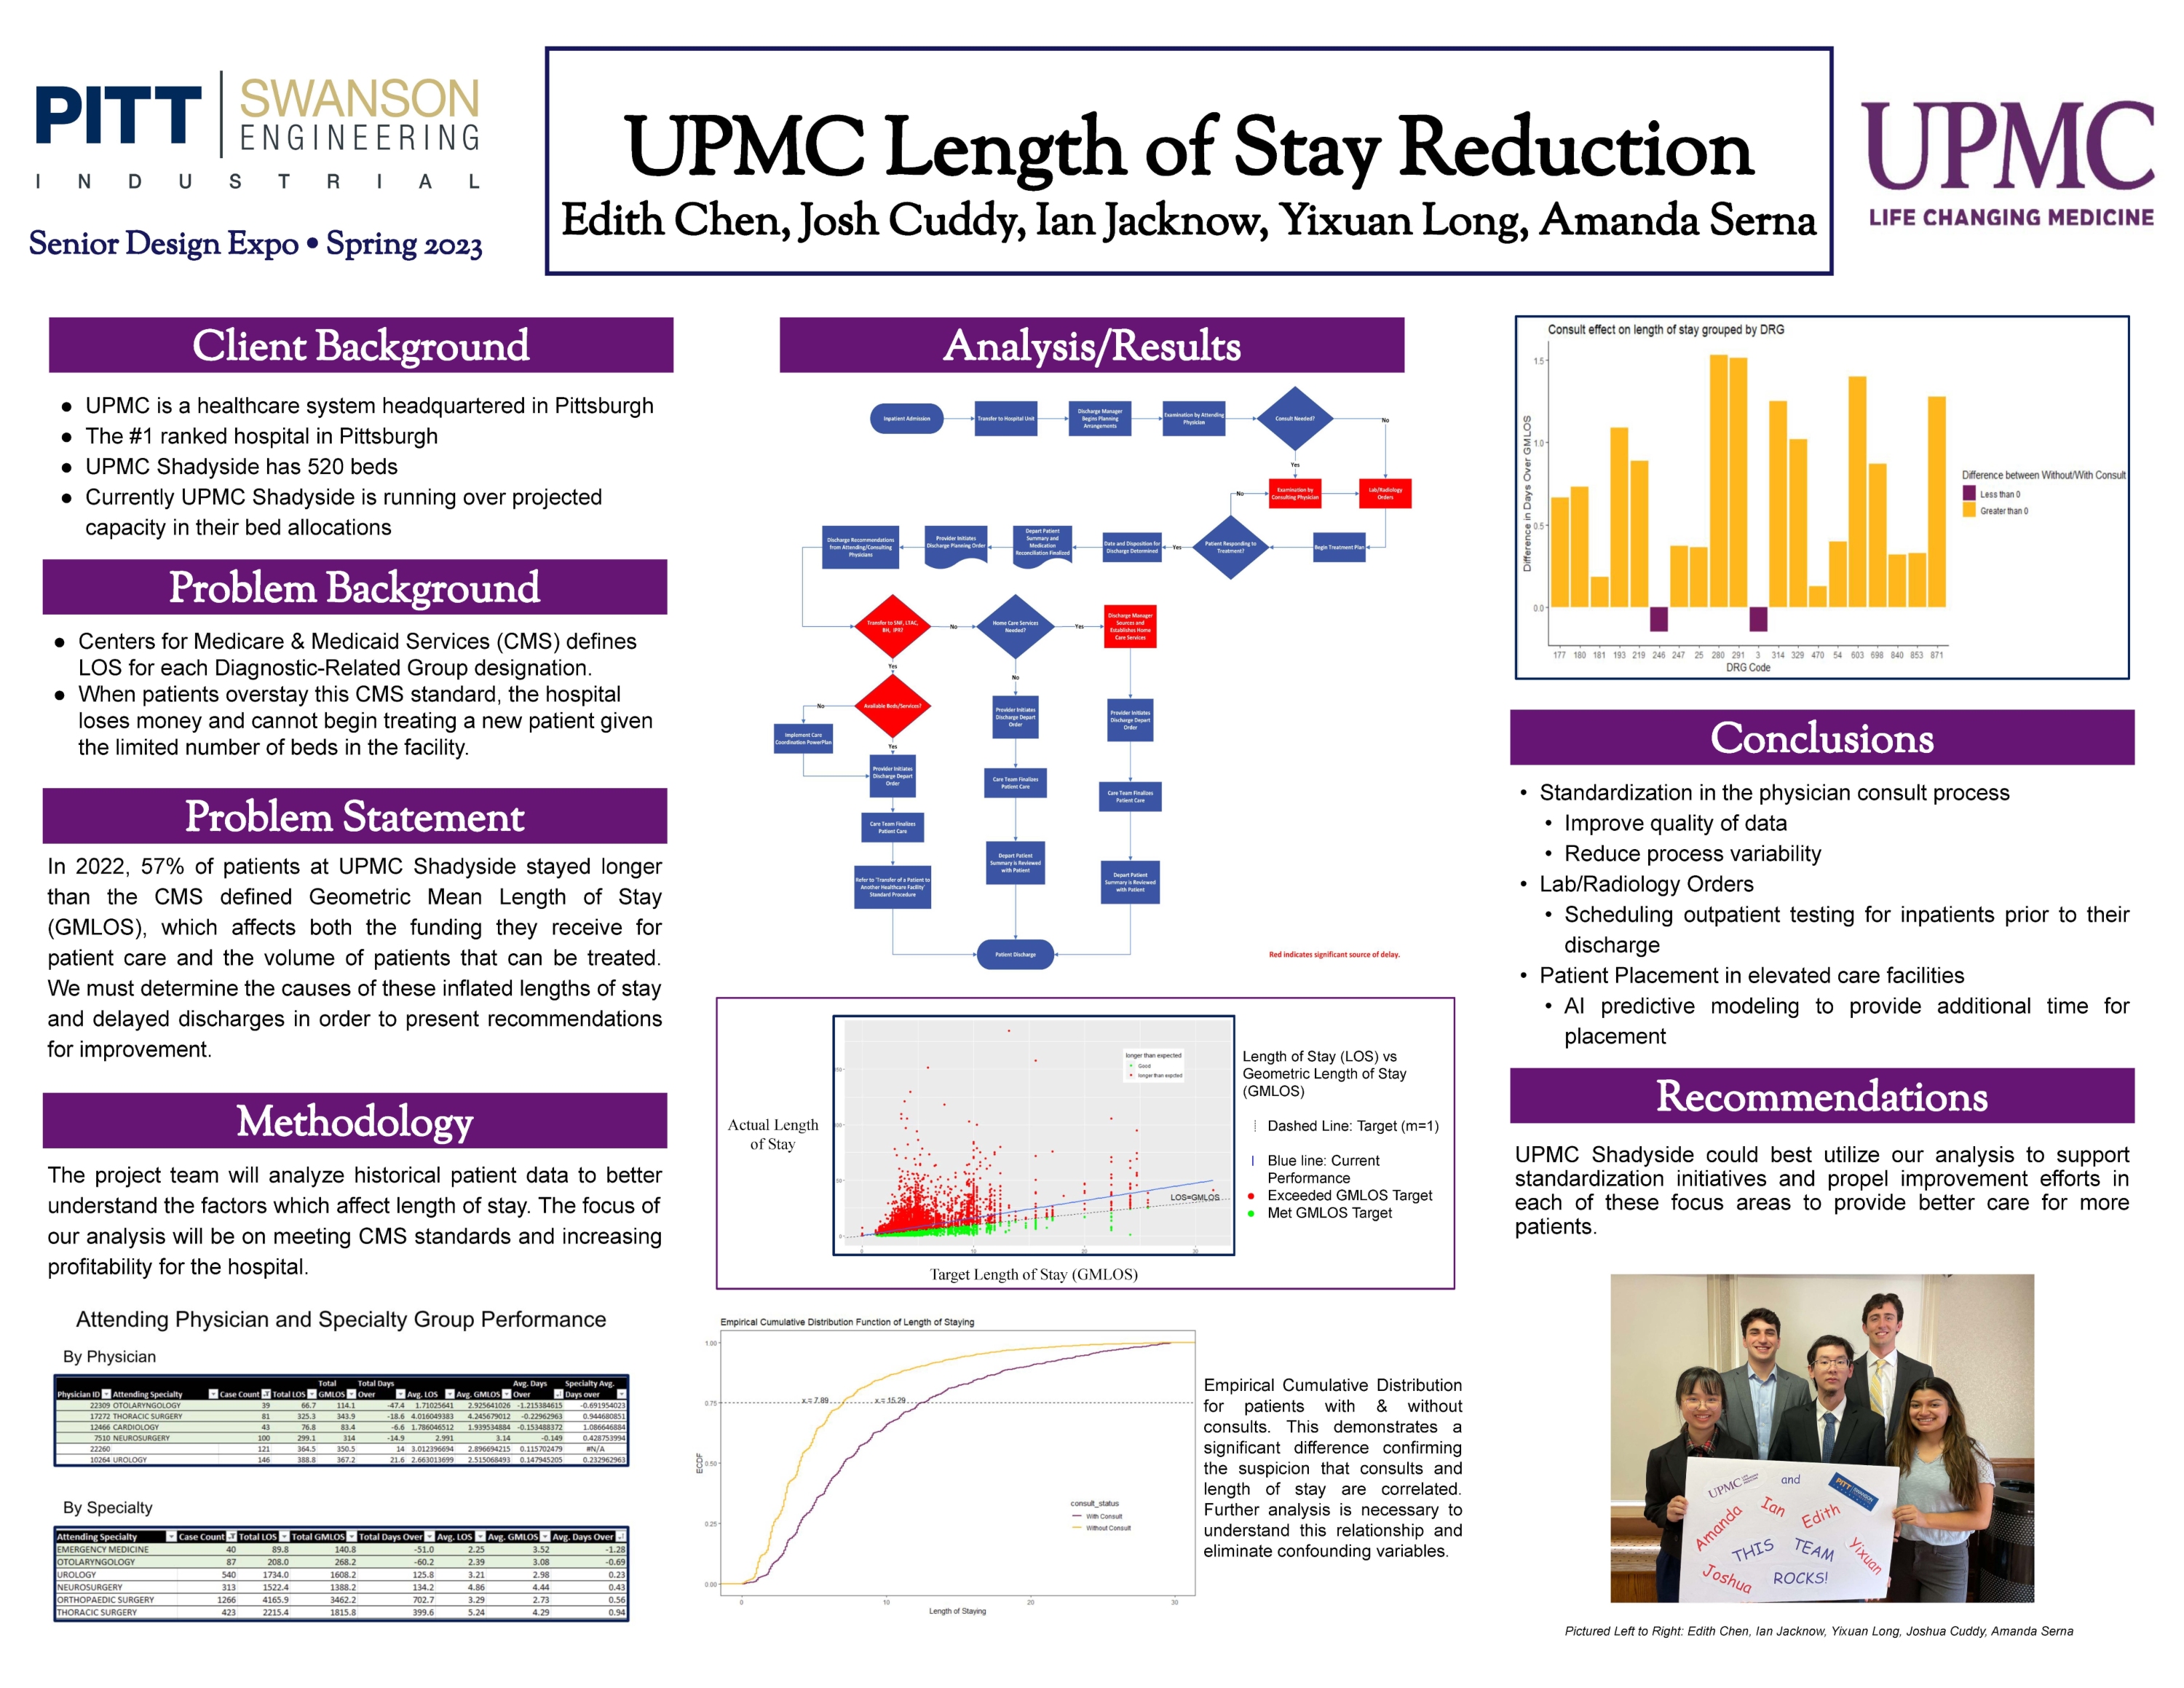 UPMC research project poster